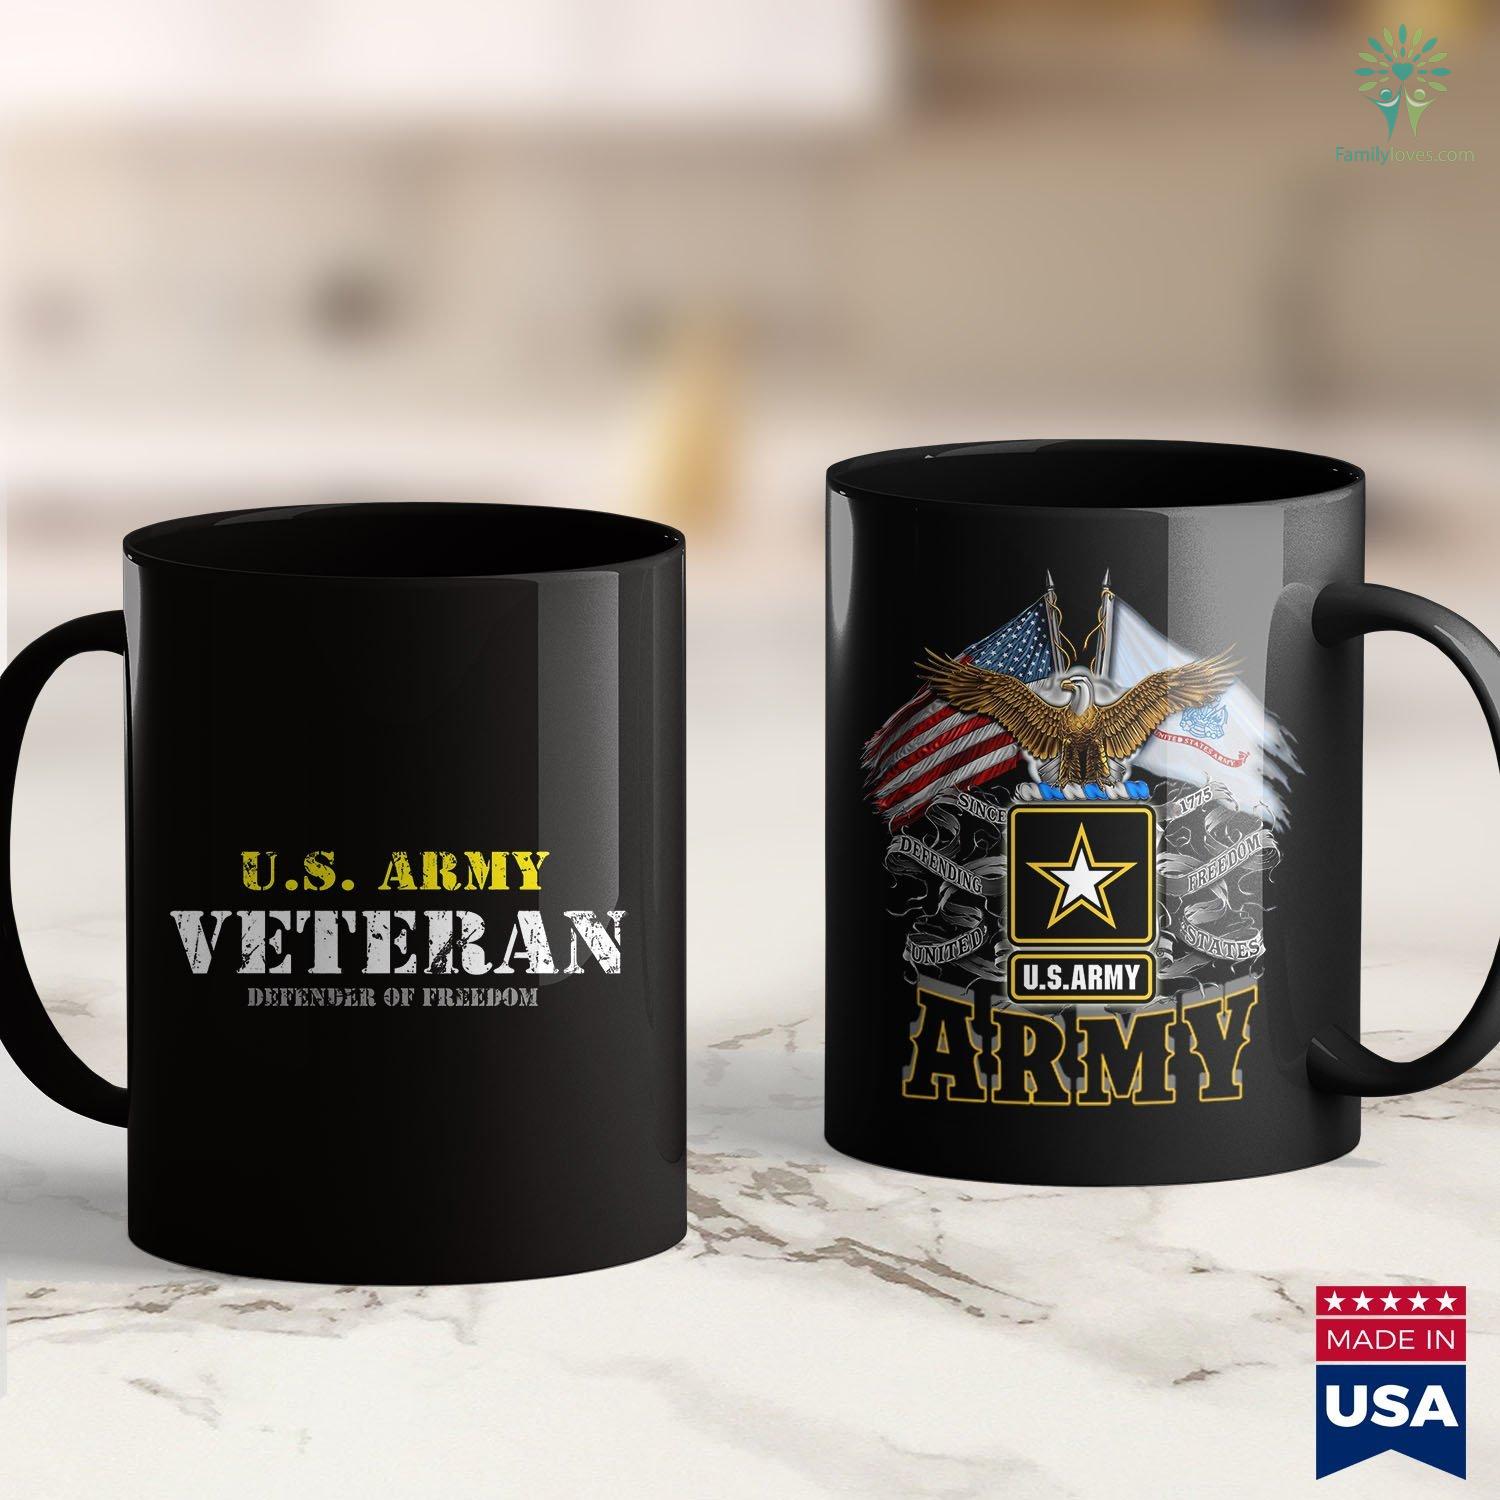 NEW US ARMY  VETERAN COFFEE MUG CUP RETIREMENT GIFT BLACK MADE IN THE USA 